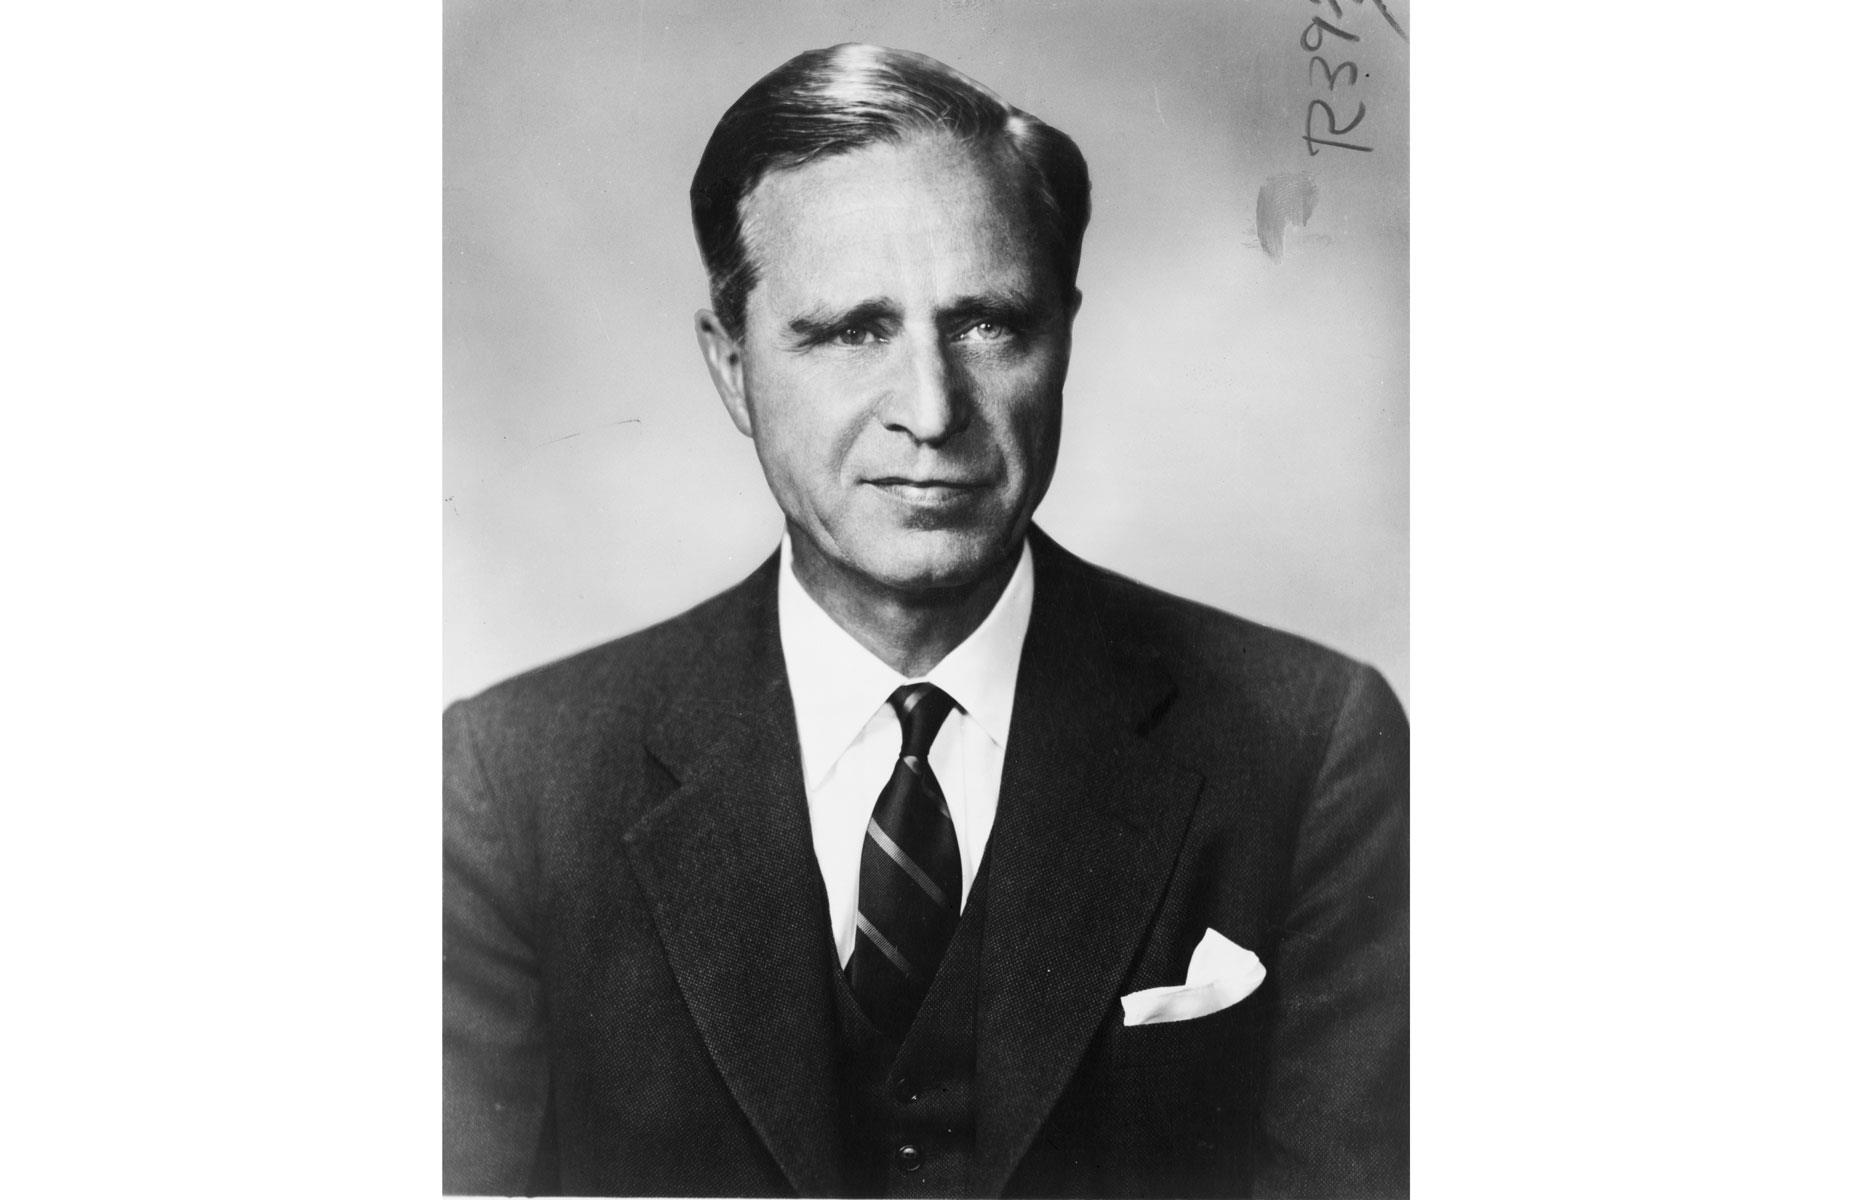 <p>Regarded as one of the great industrialists of his day, Samuel forged powerful connections with the Rockefellers and other prominent American families.</p>  <p>He would go on to co-found the US Chamber of Commerce and was an advisor to President Herbert Hoover.</p>  <p>Samuel's eldest son, Prescott Sheldon Bush (1895-1972, shown here), married into the moneyed Walker family and helped further expand the Bush fortune through his successful investment banking career. Prescott was elected to the US Senate in 1952. </p>